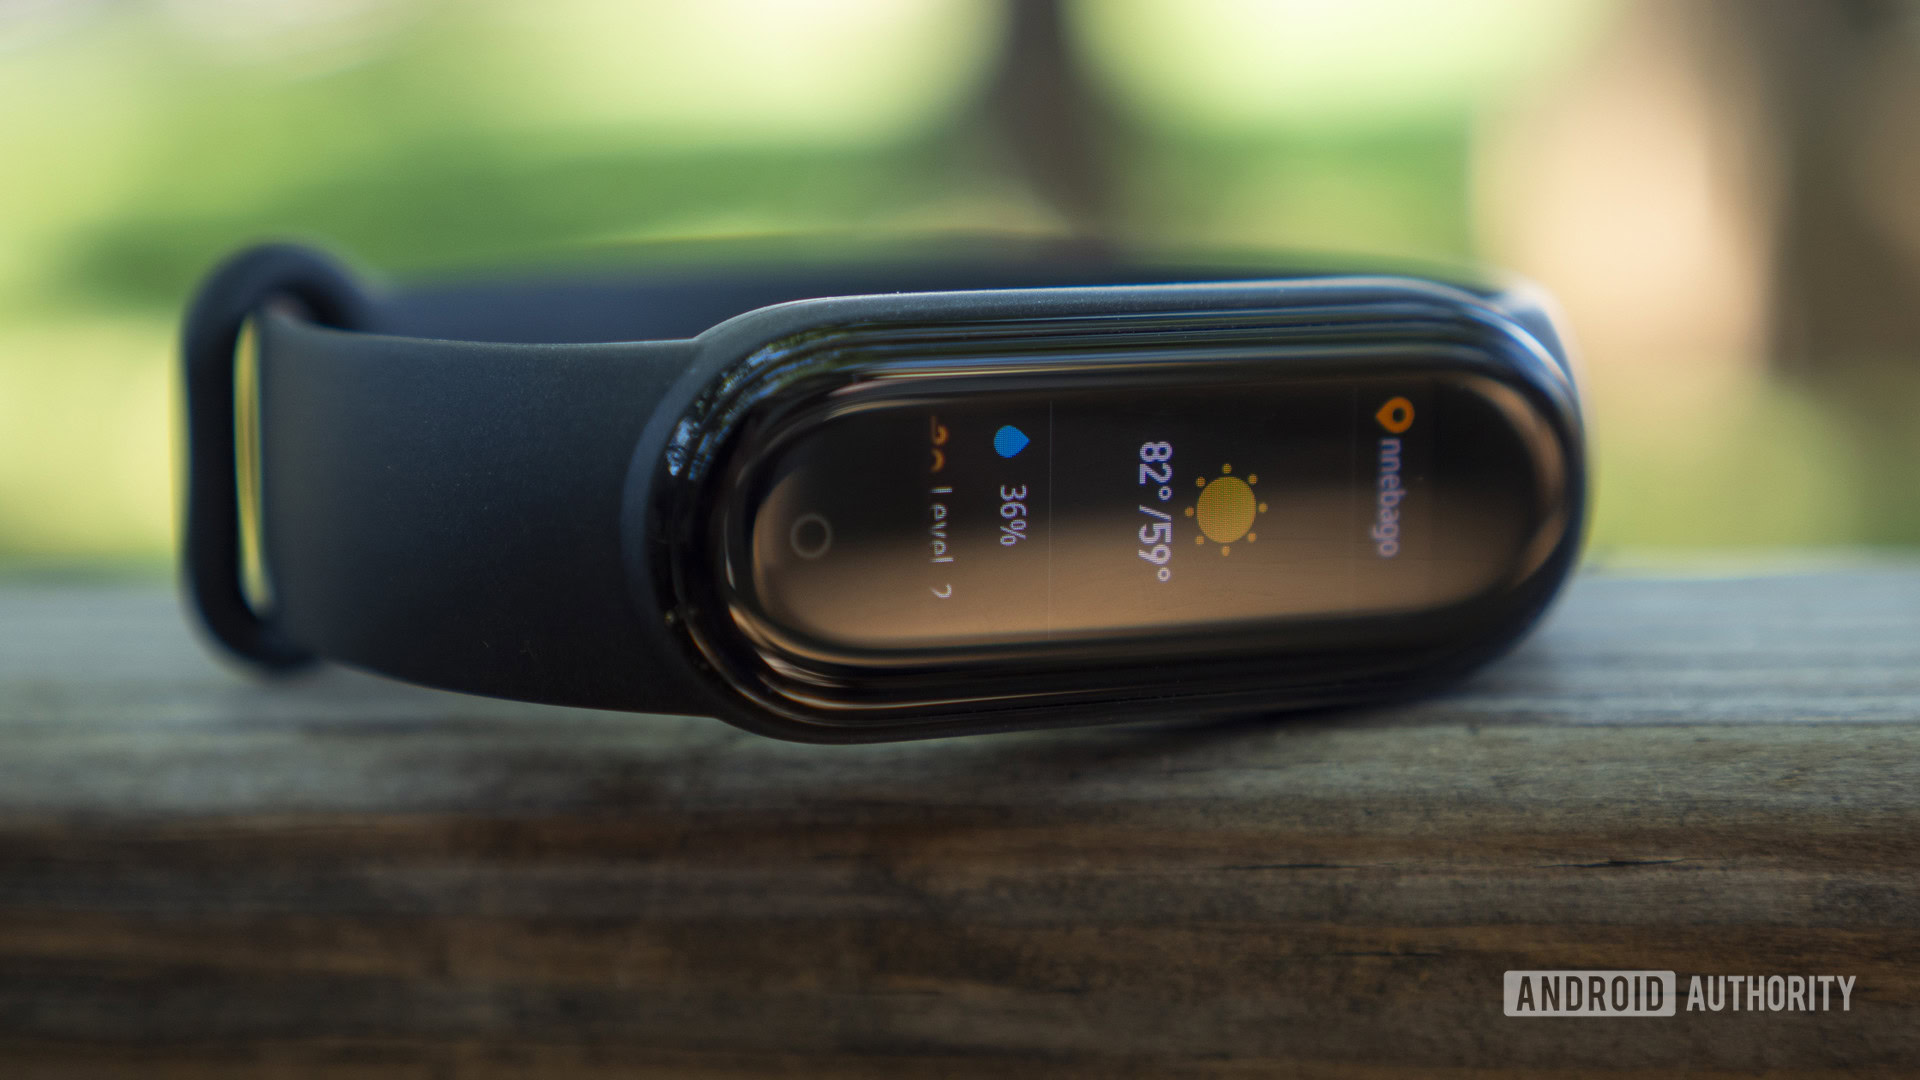 Mi Band 4 vs Mi Band 5 vs Mi Band 6 : Which Has the Best Features for You?  